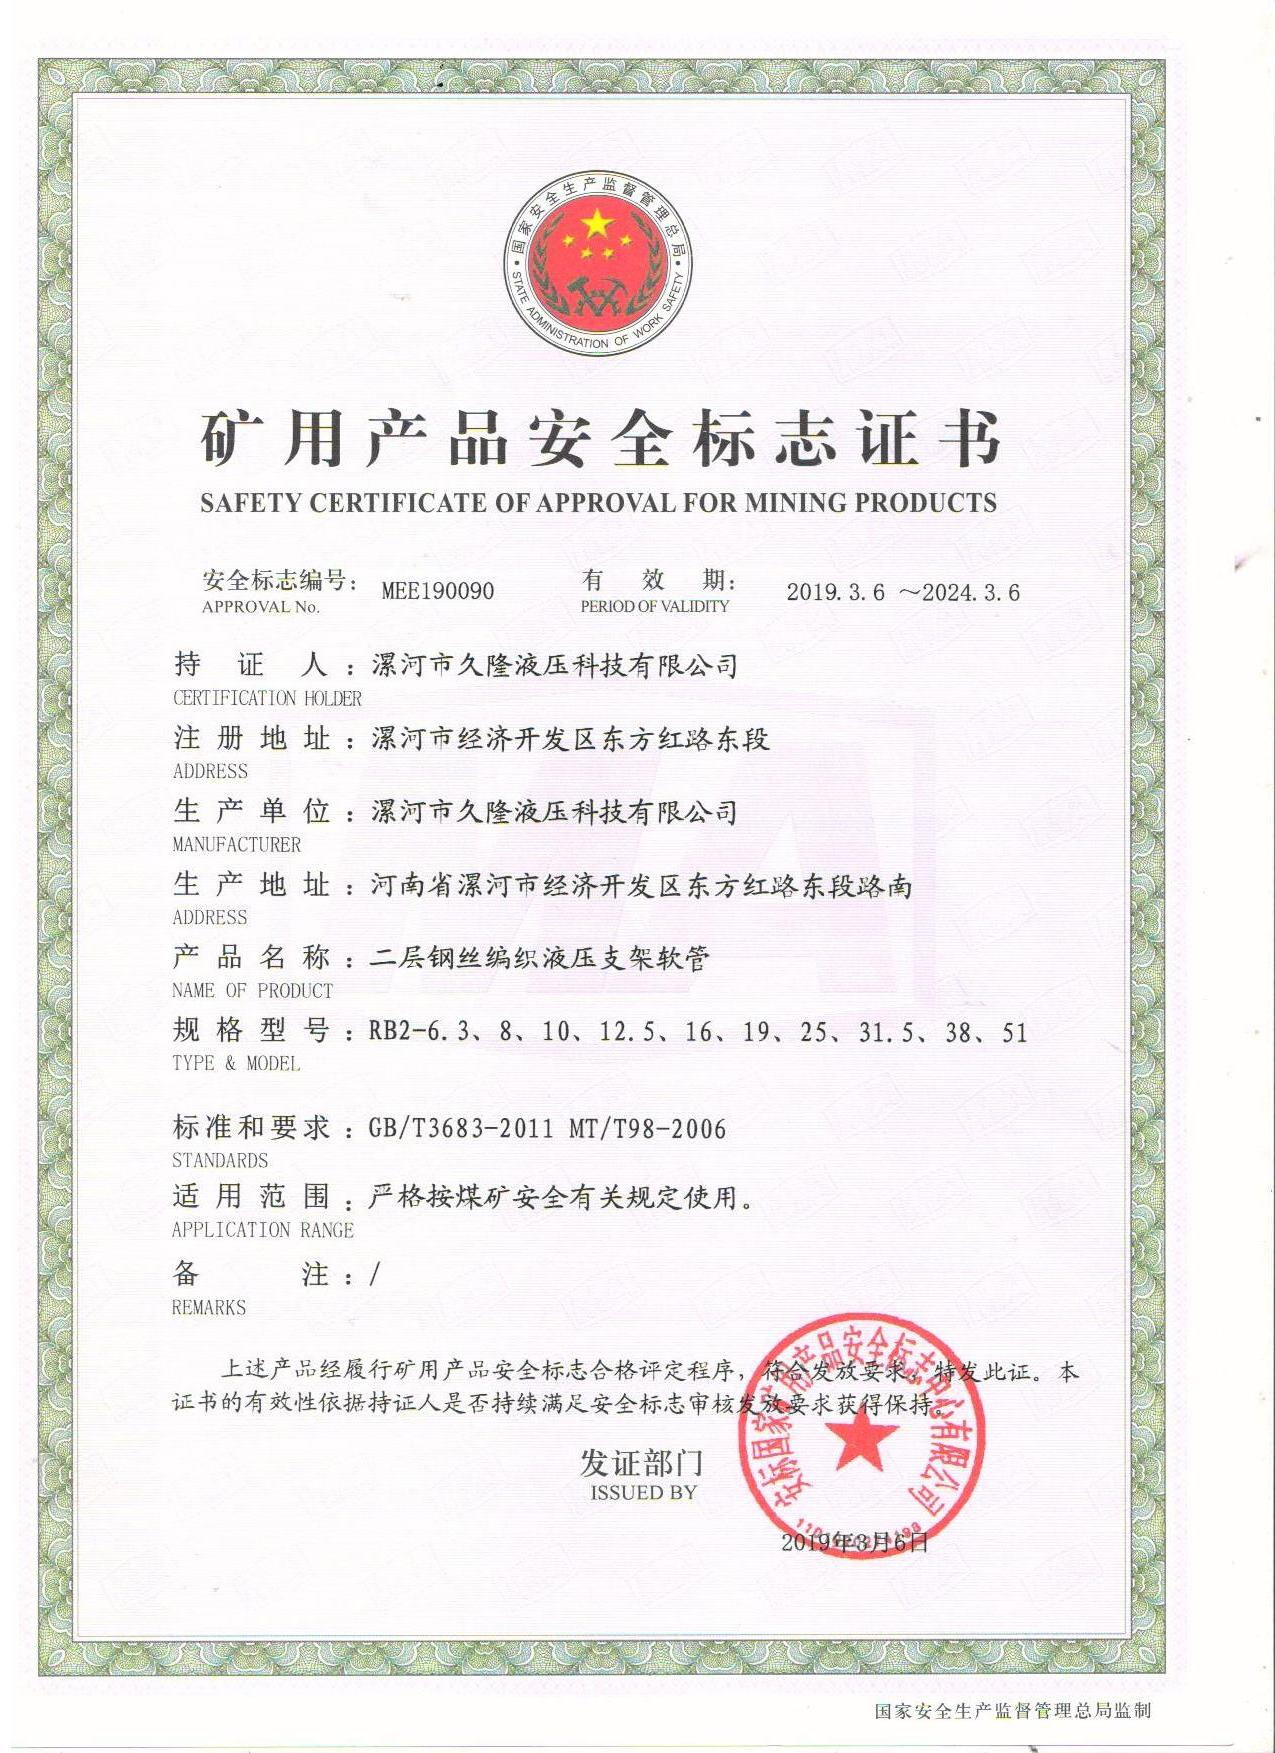 MINING PRODUCT SAFETY MARK CERTIFICATE